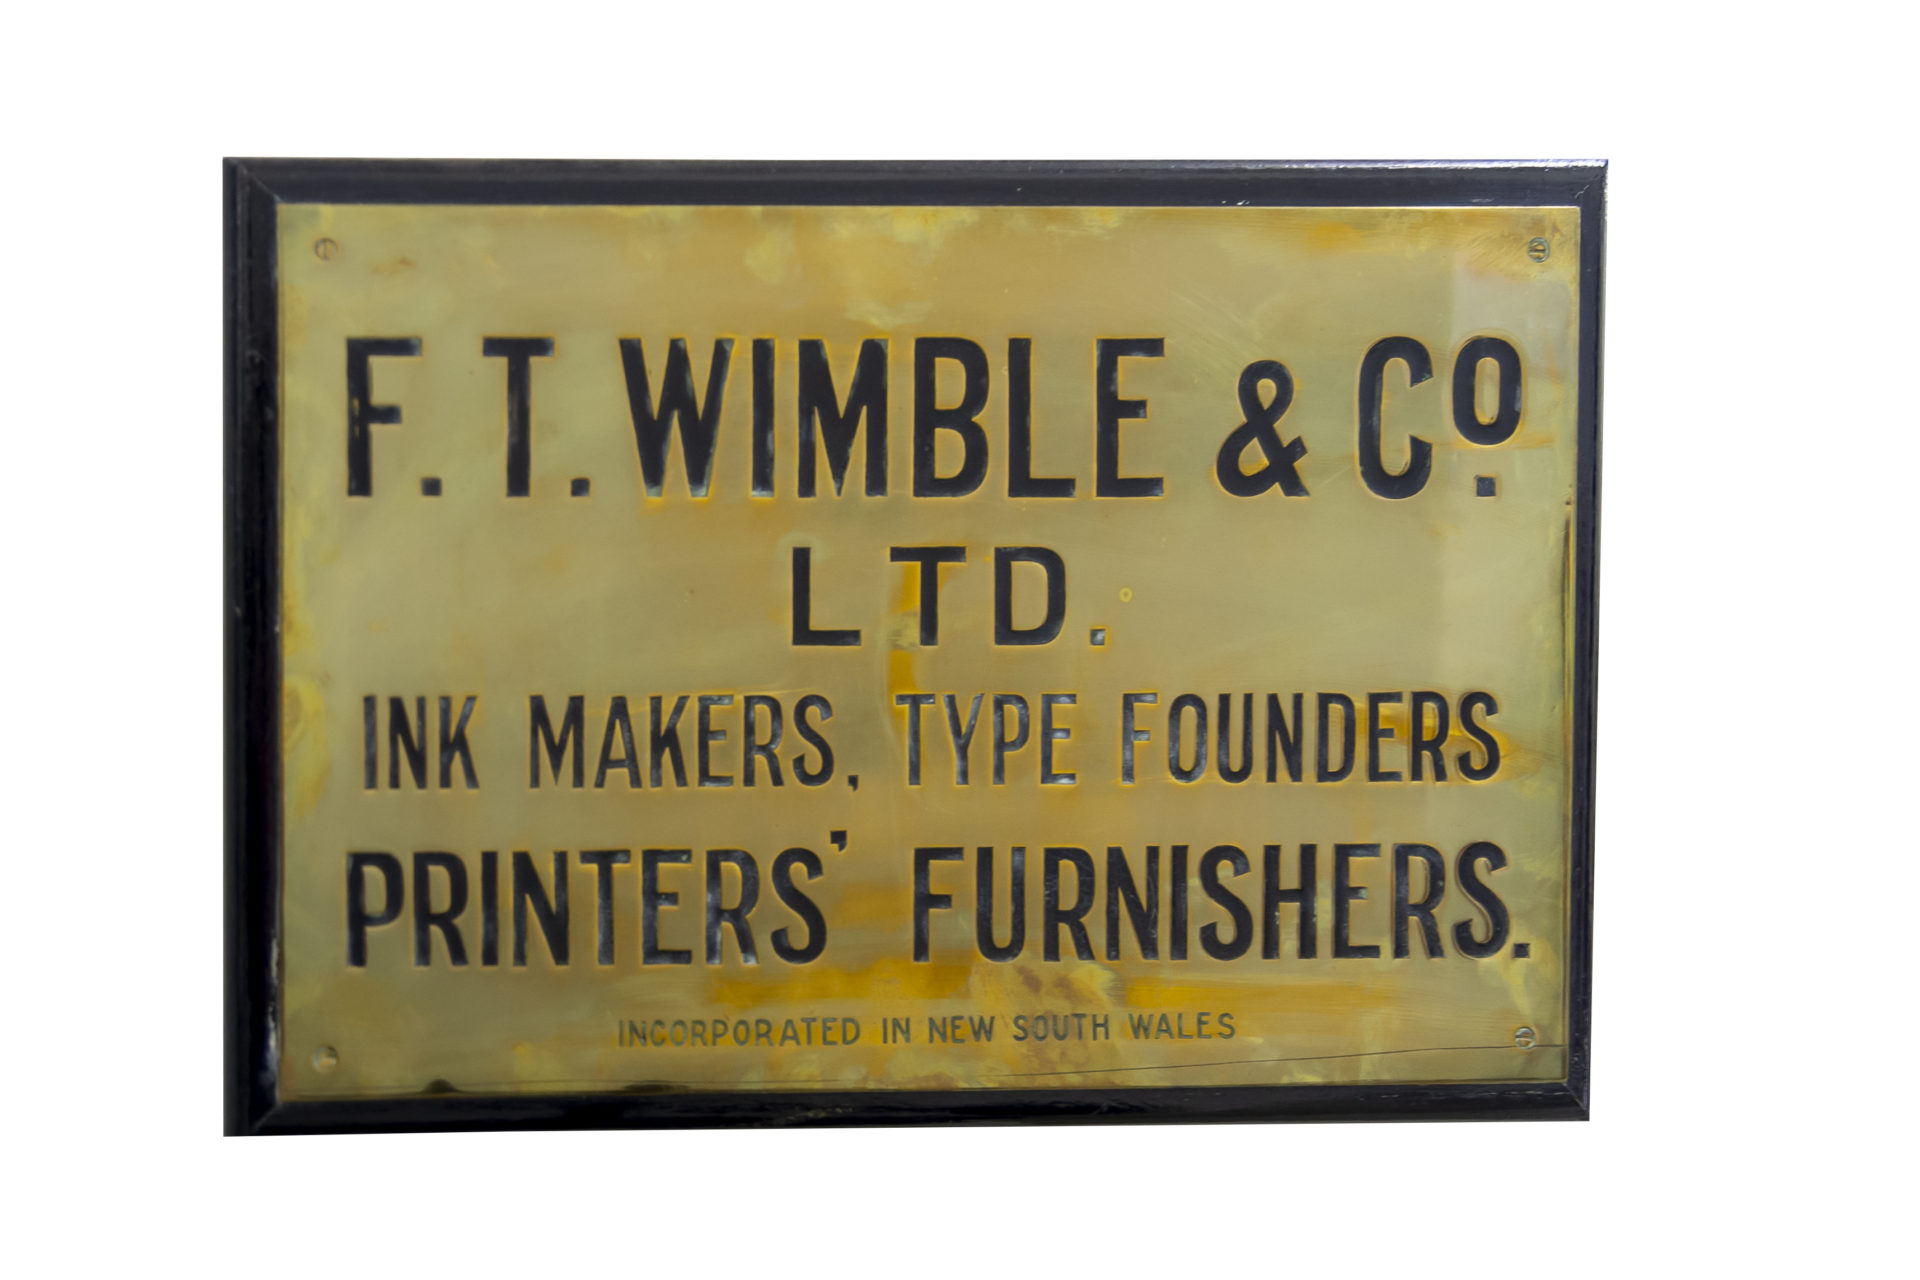 Bronze plaque of F.T. WIMBLE & Co. LTD INK MAKERS, TYPE FOUNDERS, PRINTERS' FURNISHERS Incorporated in New South Waes